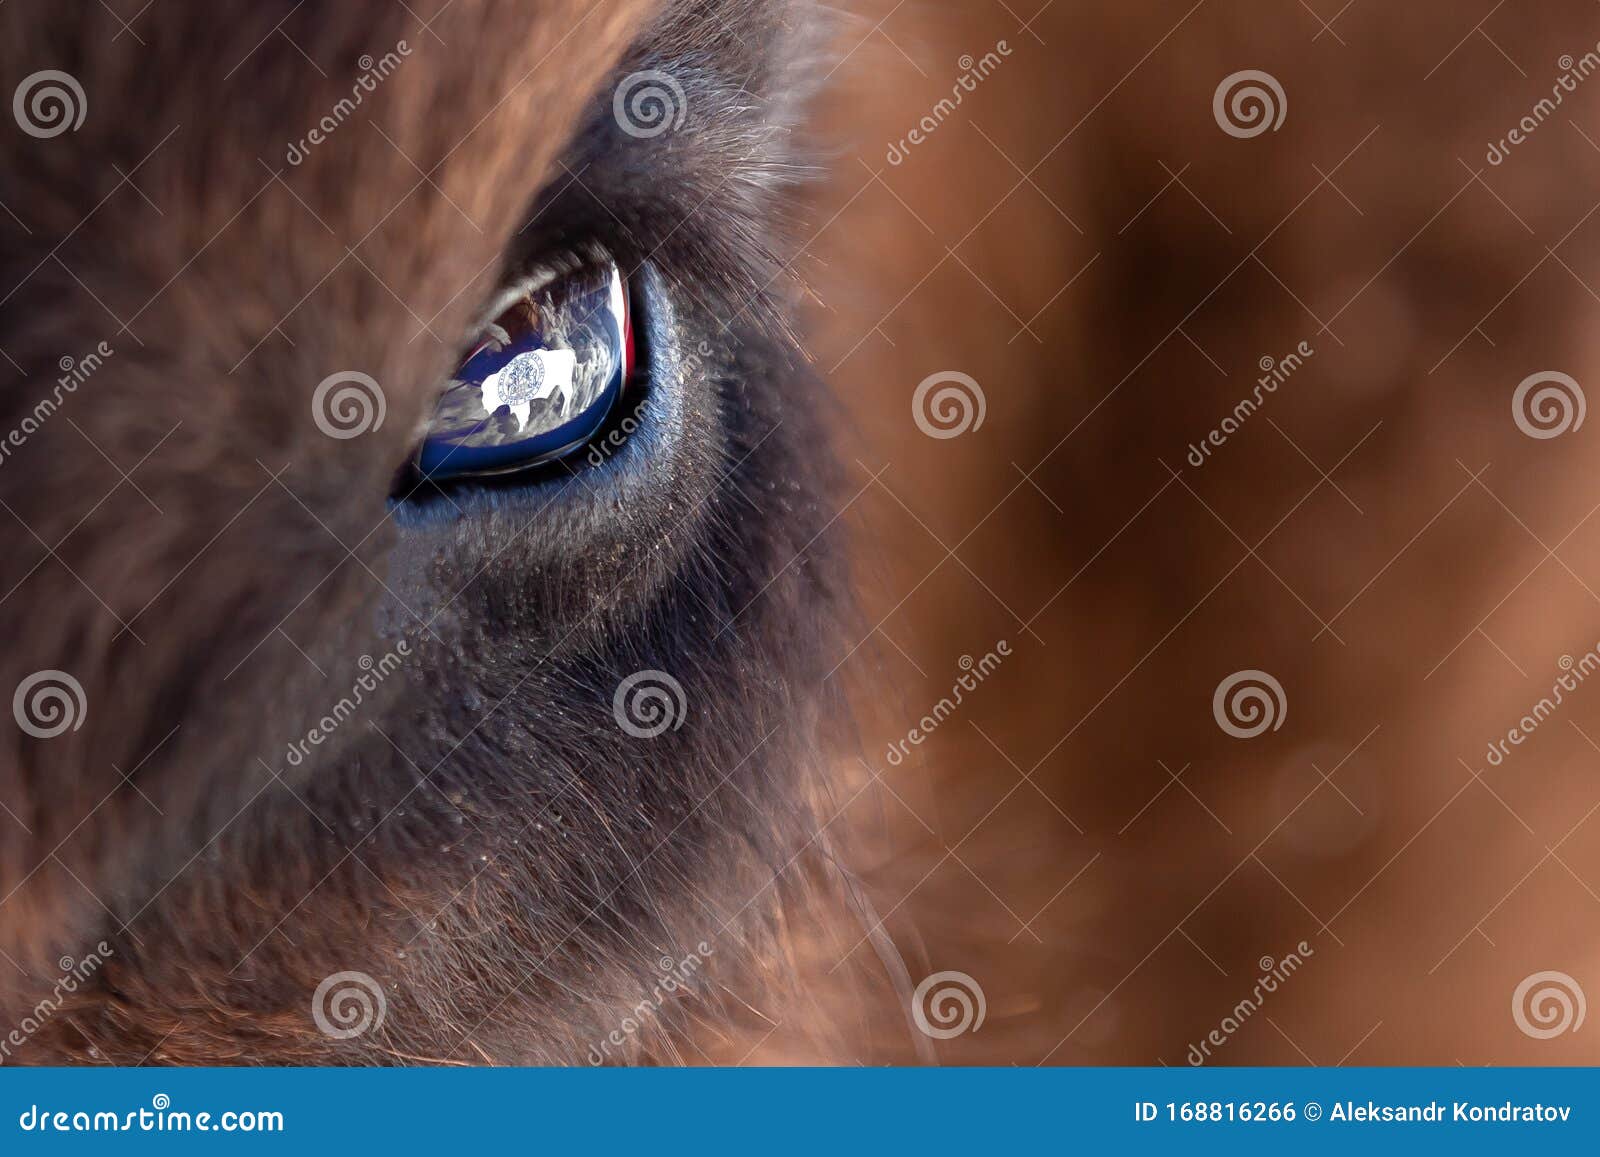 Close-up on the Big Eye of an Animal, Bull, Bison, Cow or Horse with Brown  Hair and the Reflection of the Wyoming State Flag in Stock Photo - Image of  face, calf: